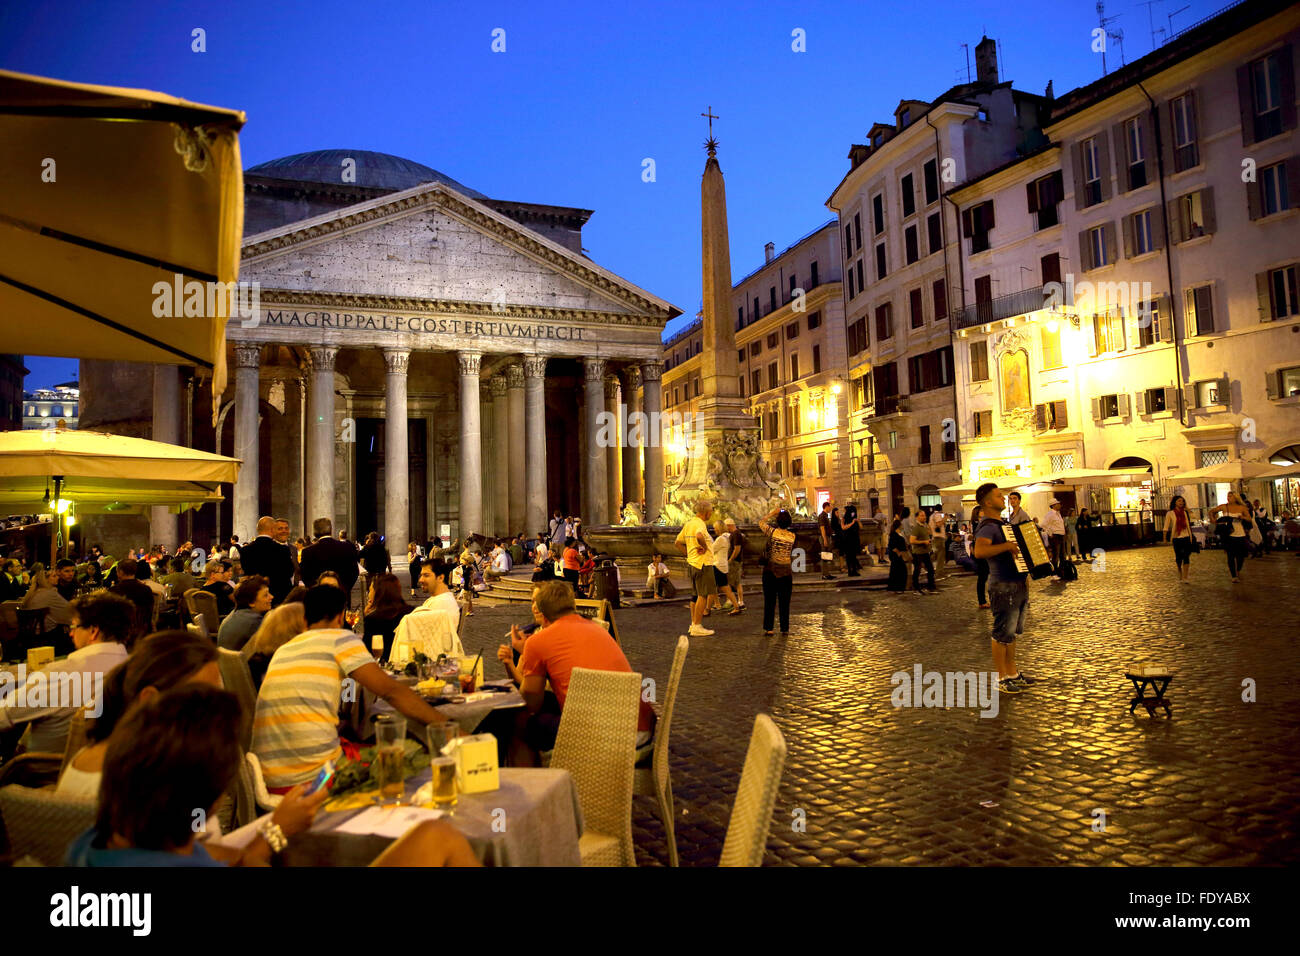 Piazza della Rotonda at night with the Pantheon in the background. Stock Photo